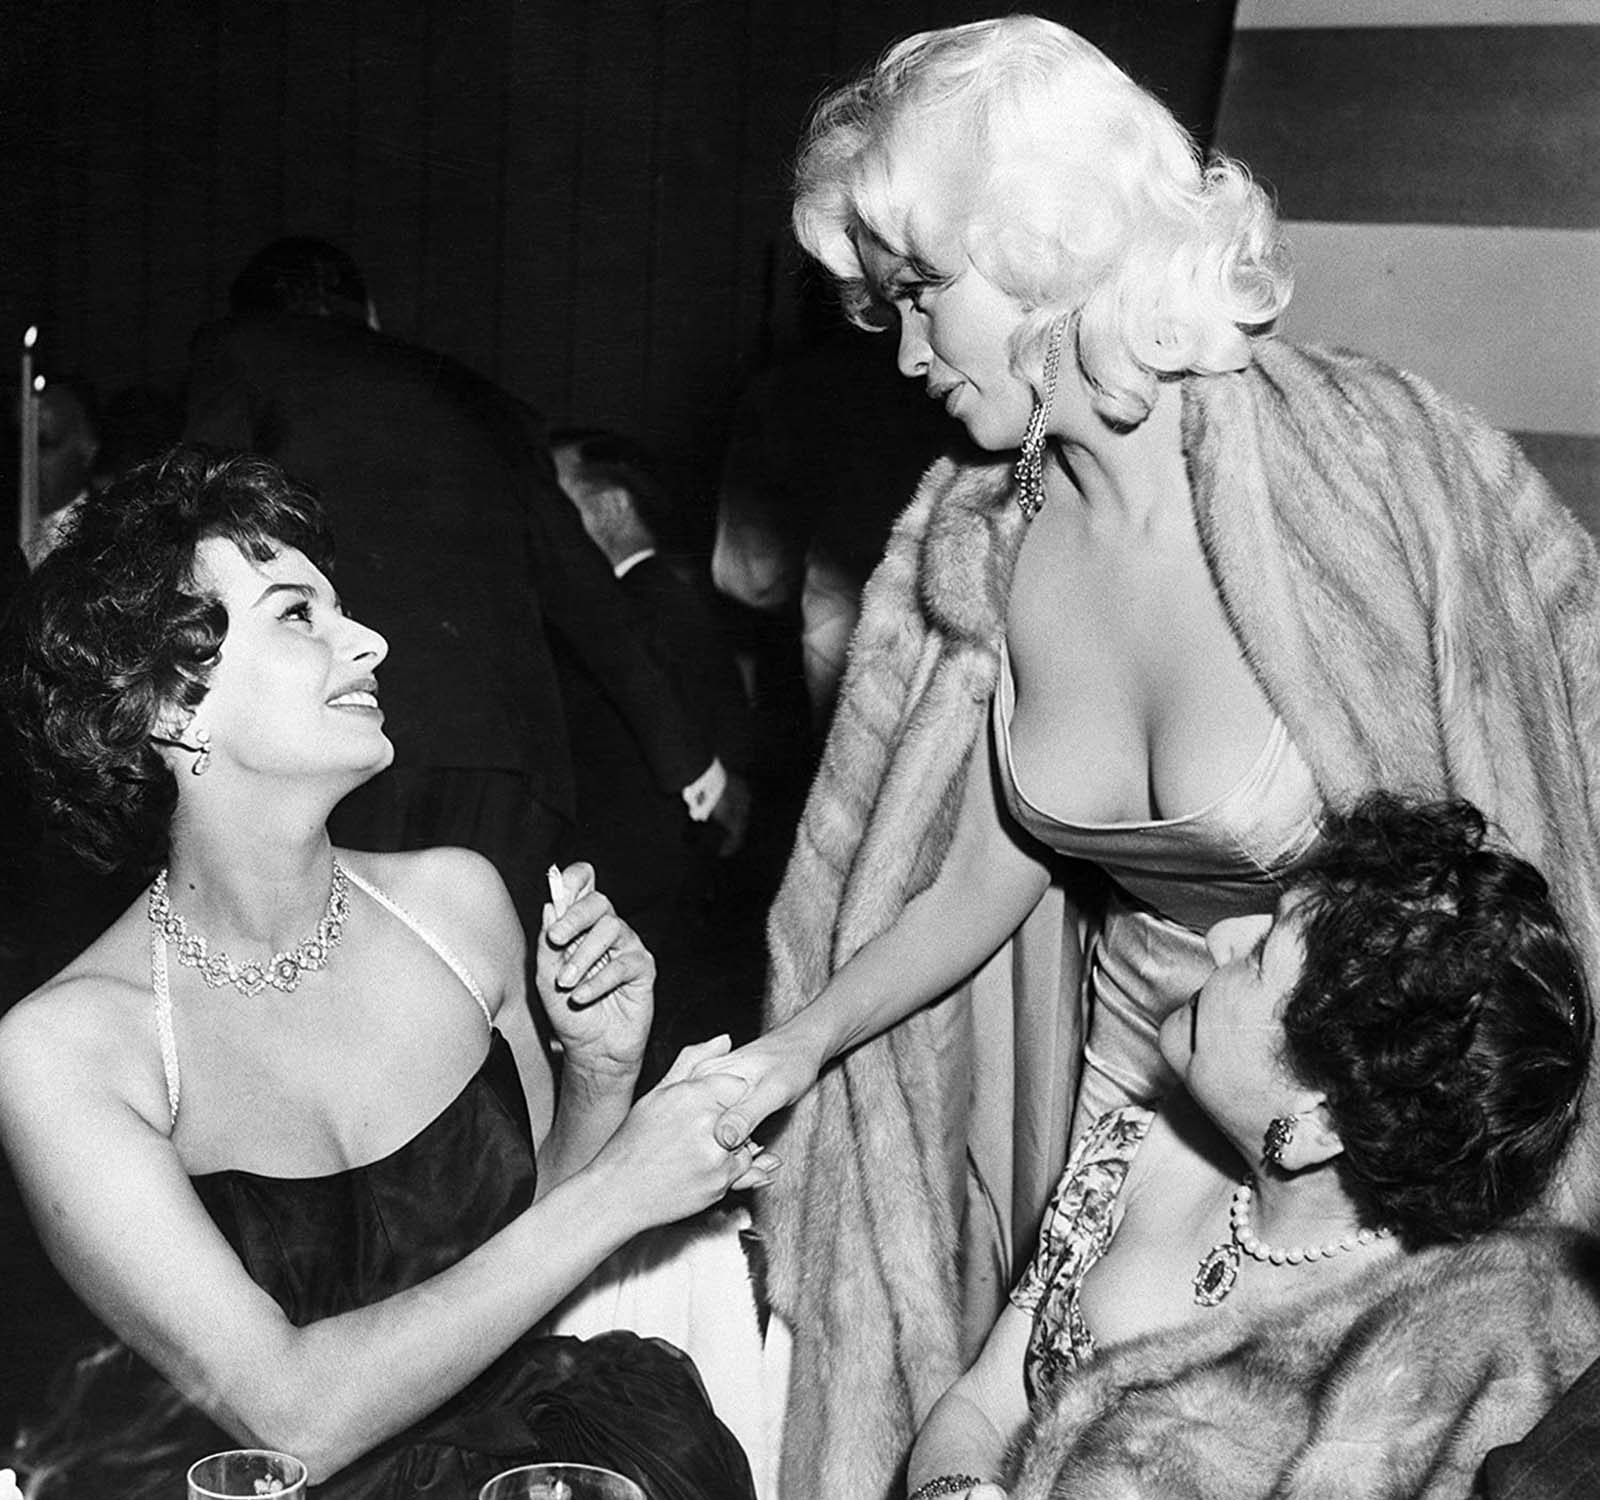 The story behind the infamous Sophia Loren and Jayne Mansfield photo, 1957